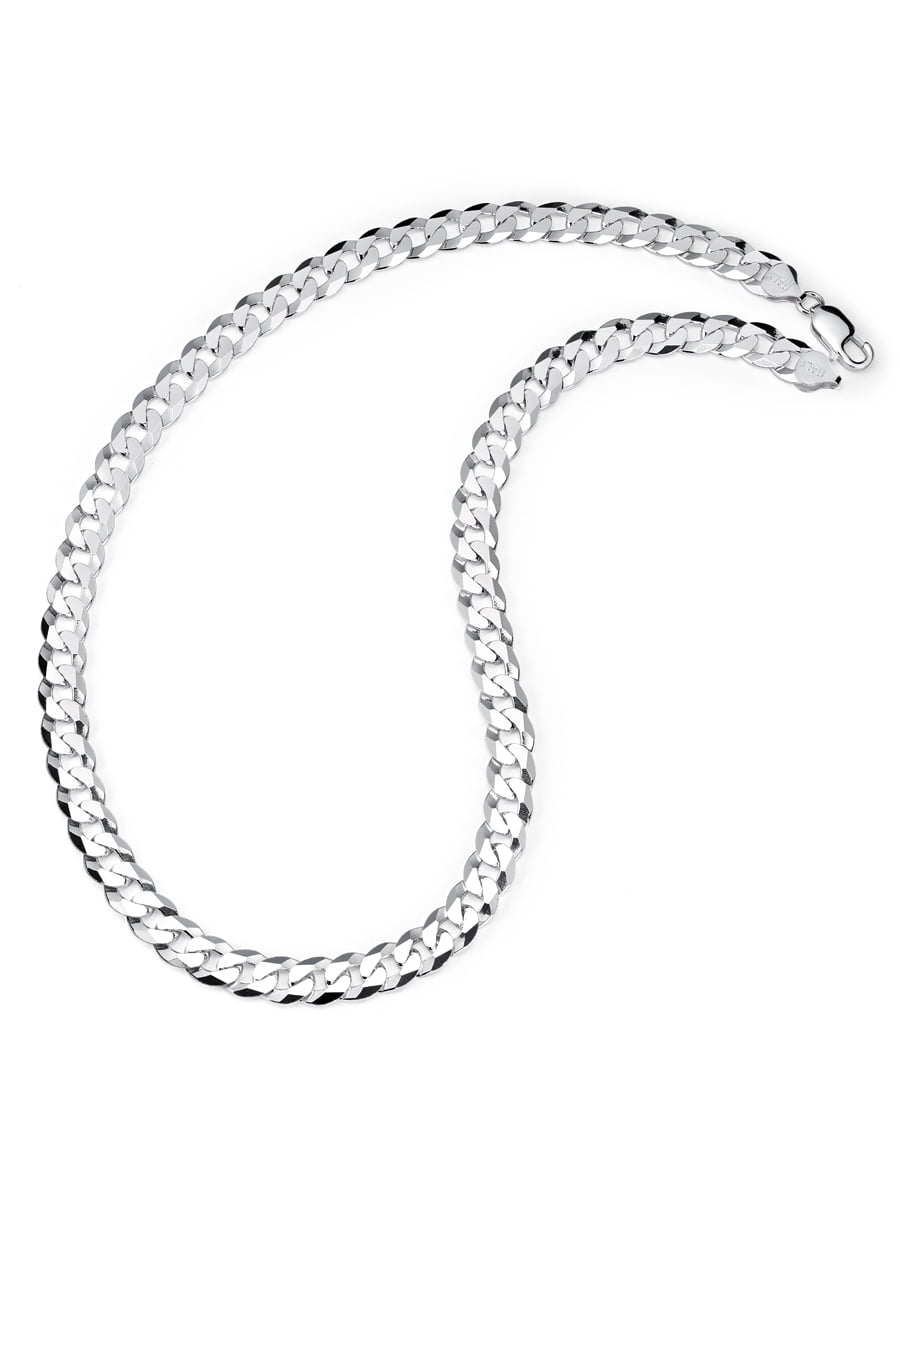 24 & 30 inch Stainless Steel Figaro Chain Necklace 7 mm wide sizes 20 22